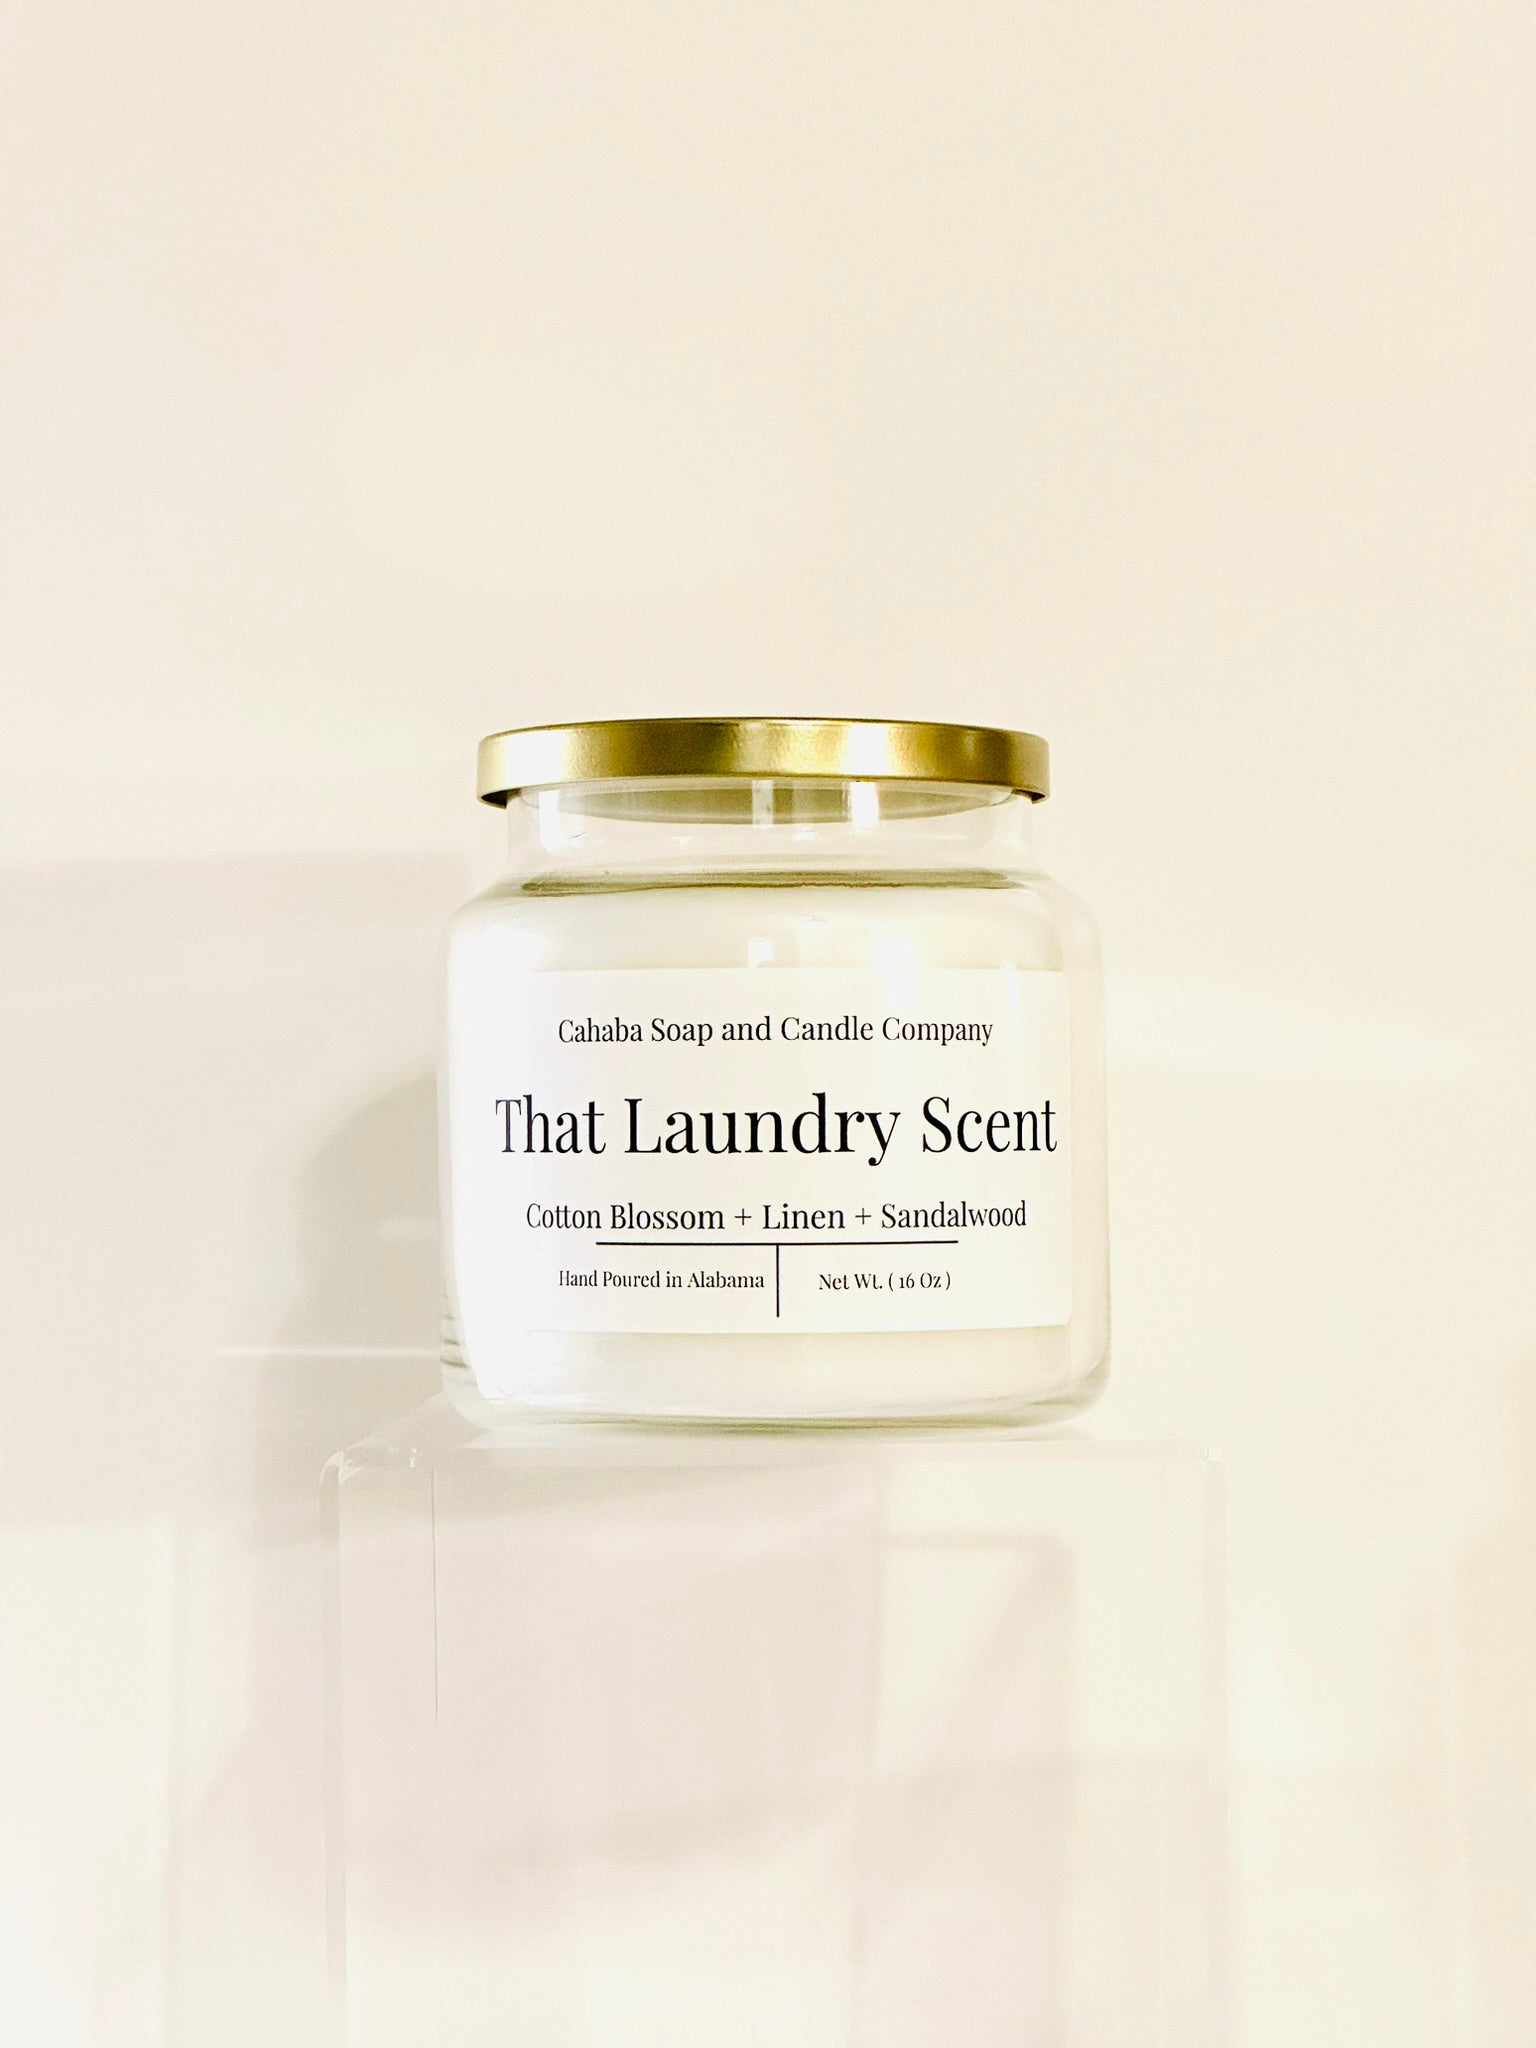 That Laundry Scent - Cahaba Soap and Candle Company